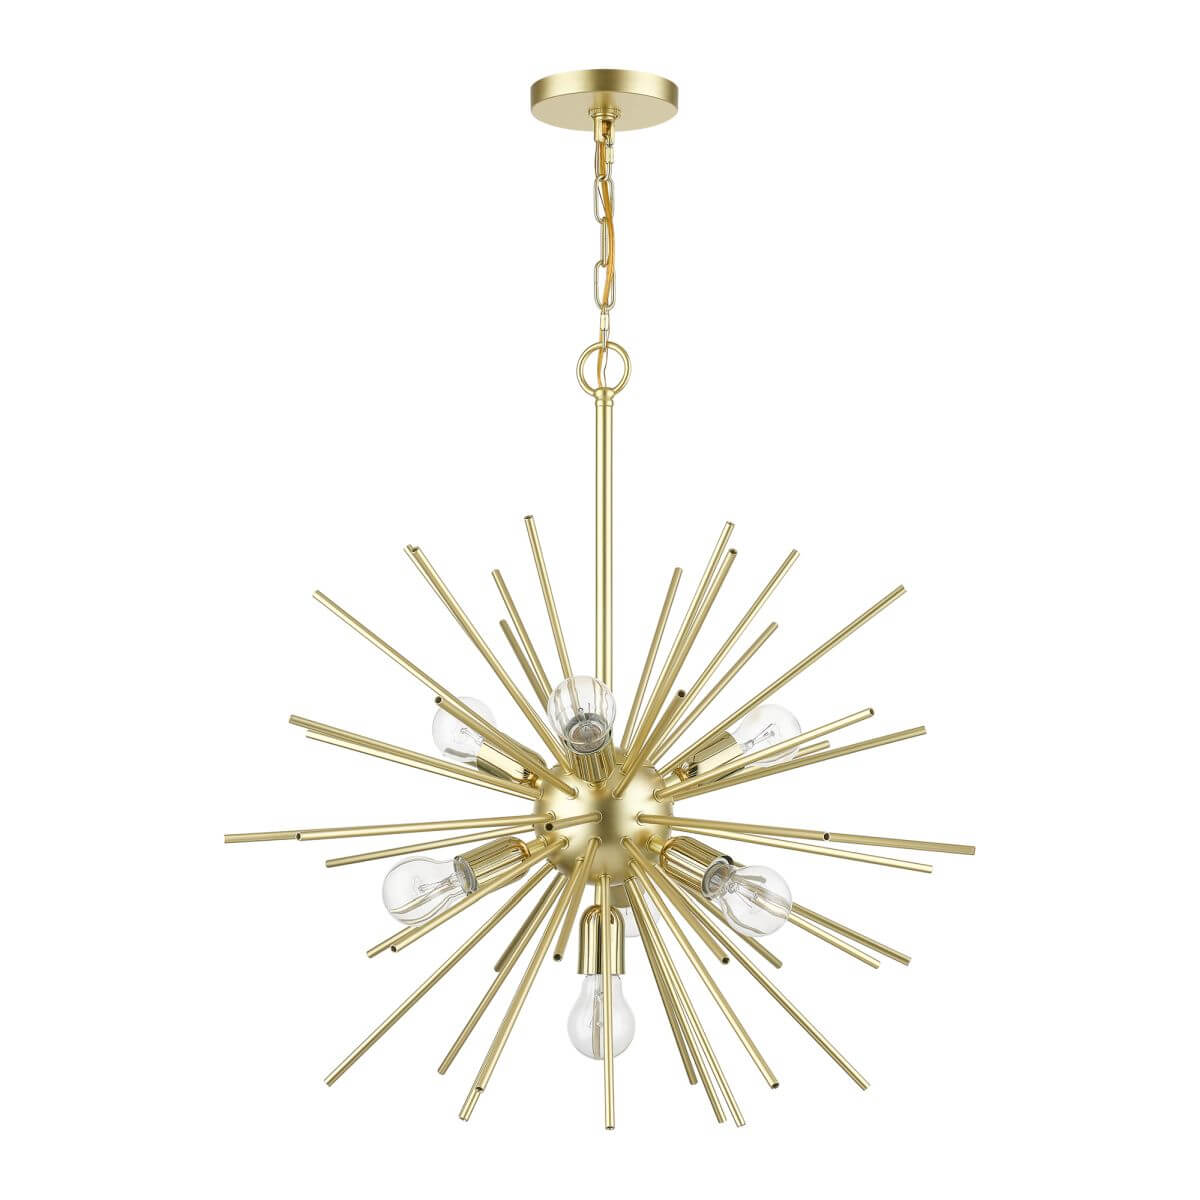 7 Light 25 inch Chandelier in Soft Gold-Polished Brass Accents with Iron Pipe Rods - 245230